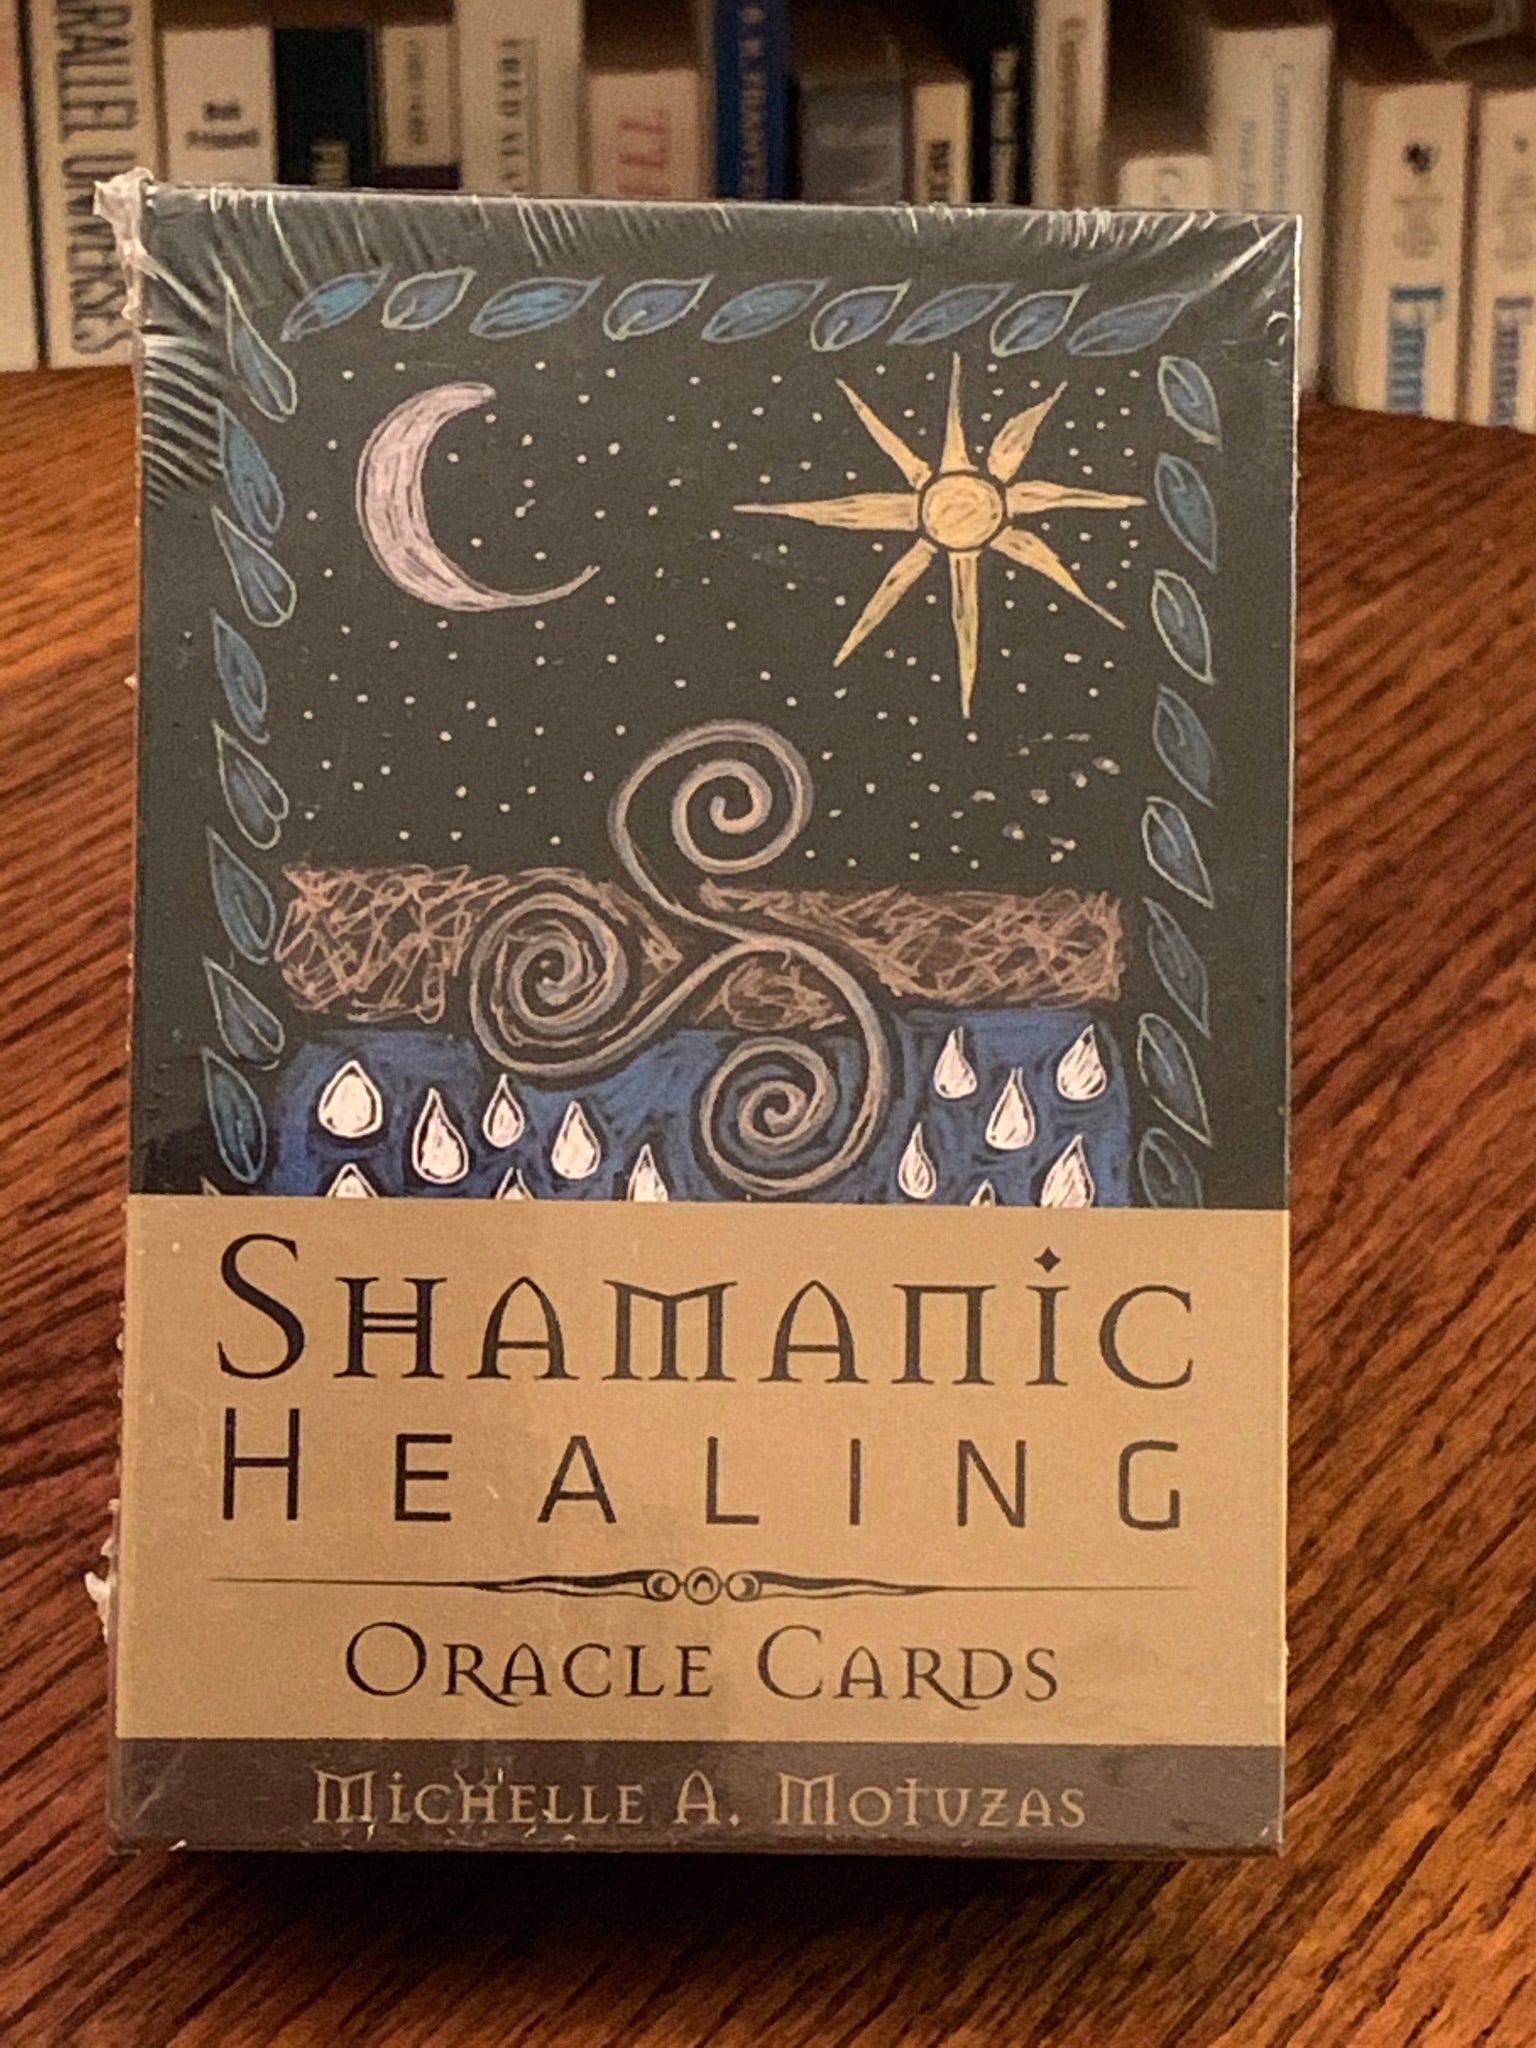 Photo of box front. The Shamanic Healing Oracle Cards bring you beautifully drawn illustrations and messages from Shamanistic traditions. The messages are simple, yet profound and the drawings are earthy and endearing. "Whether a novice or skilled reader, the messages found in these cards and the accompanying guidebook will give you insight, personal empowerment, and trust in your own intuitive abilities." The set is has 44 gold gilded cards, a guidebook and box that is magnetized. Cost is $24.99.